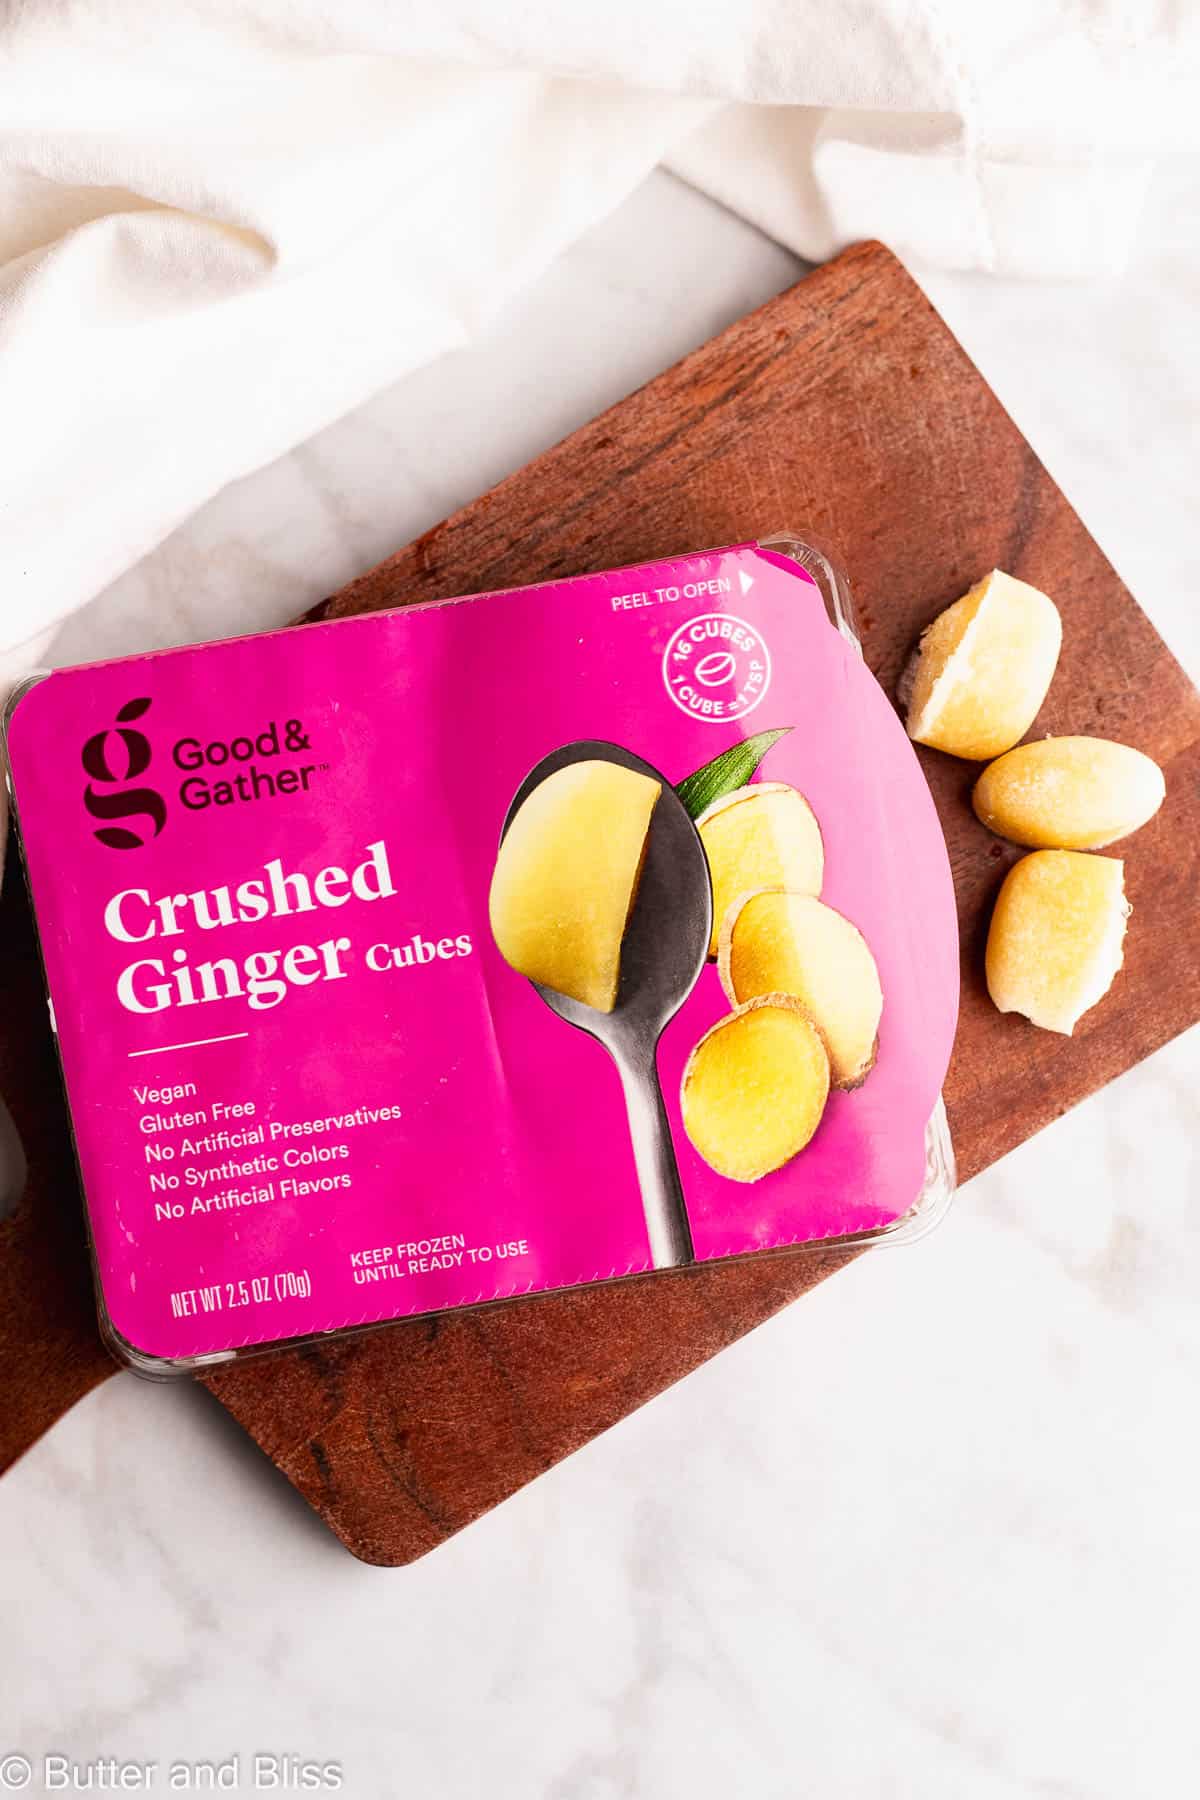 Frozen and crushed ginger cubes you can buy at the grocery.